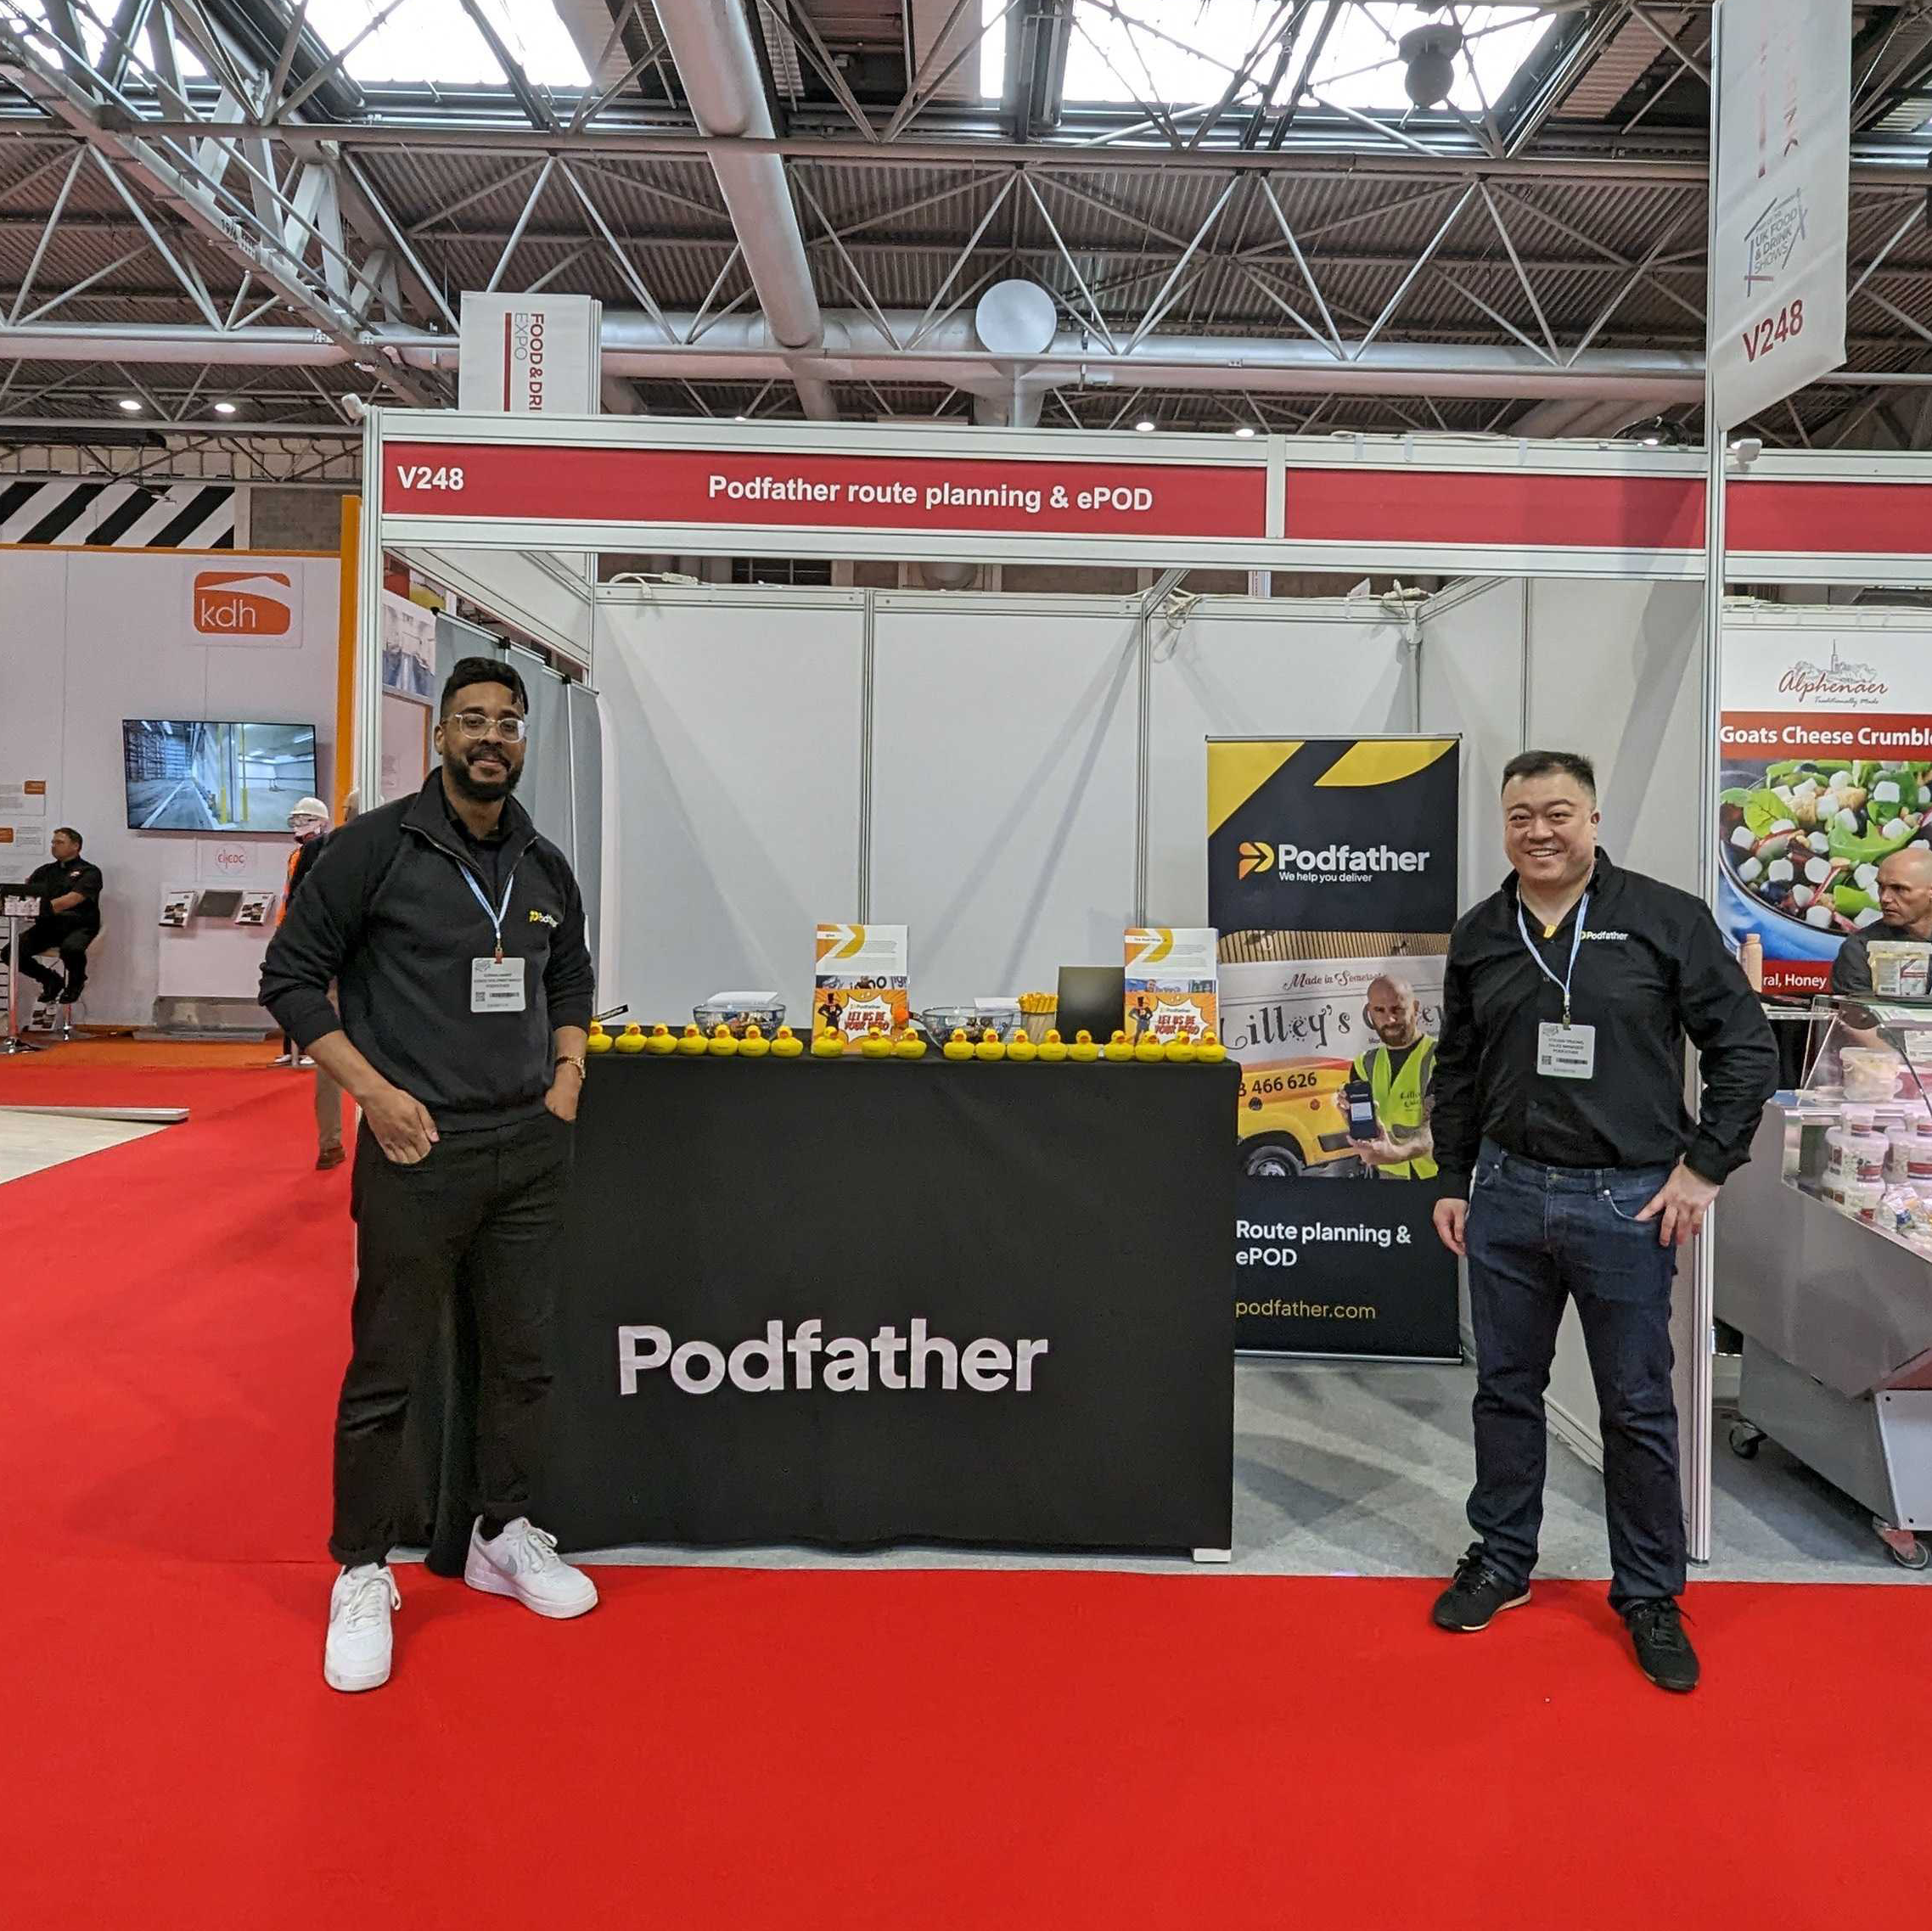 Adrian and Steven at the Food & Drink Expo